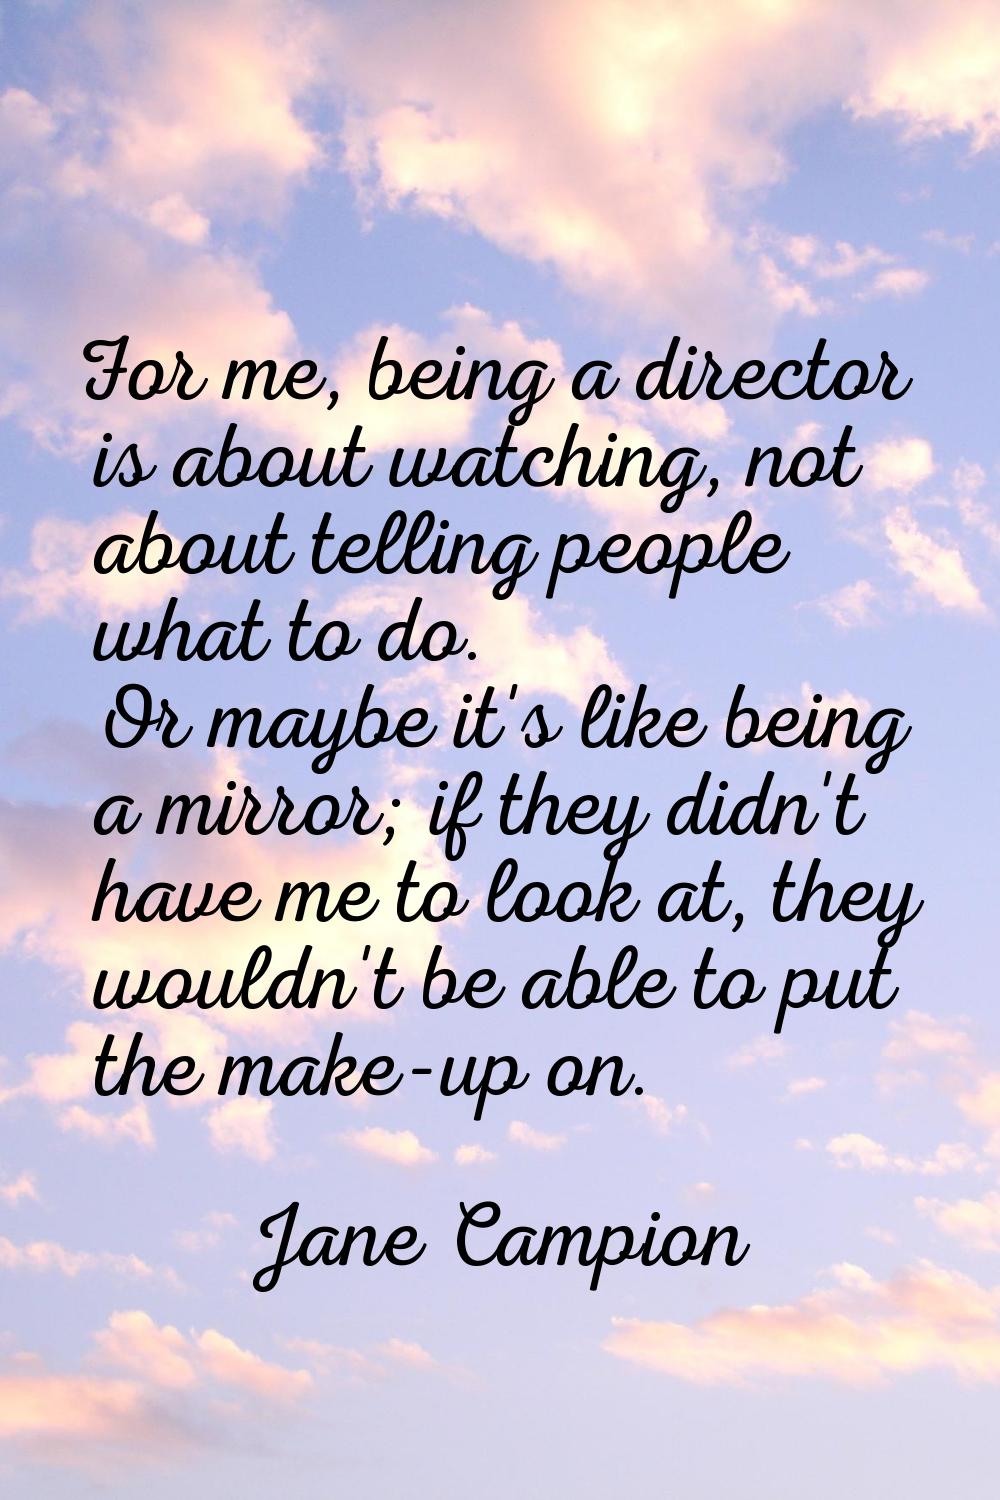 For me, being a director is about watching, not about telling people what to do. Or maybe it's like